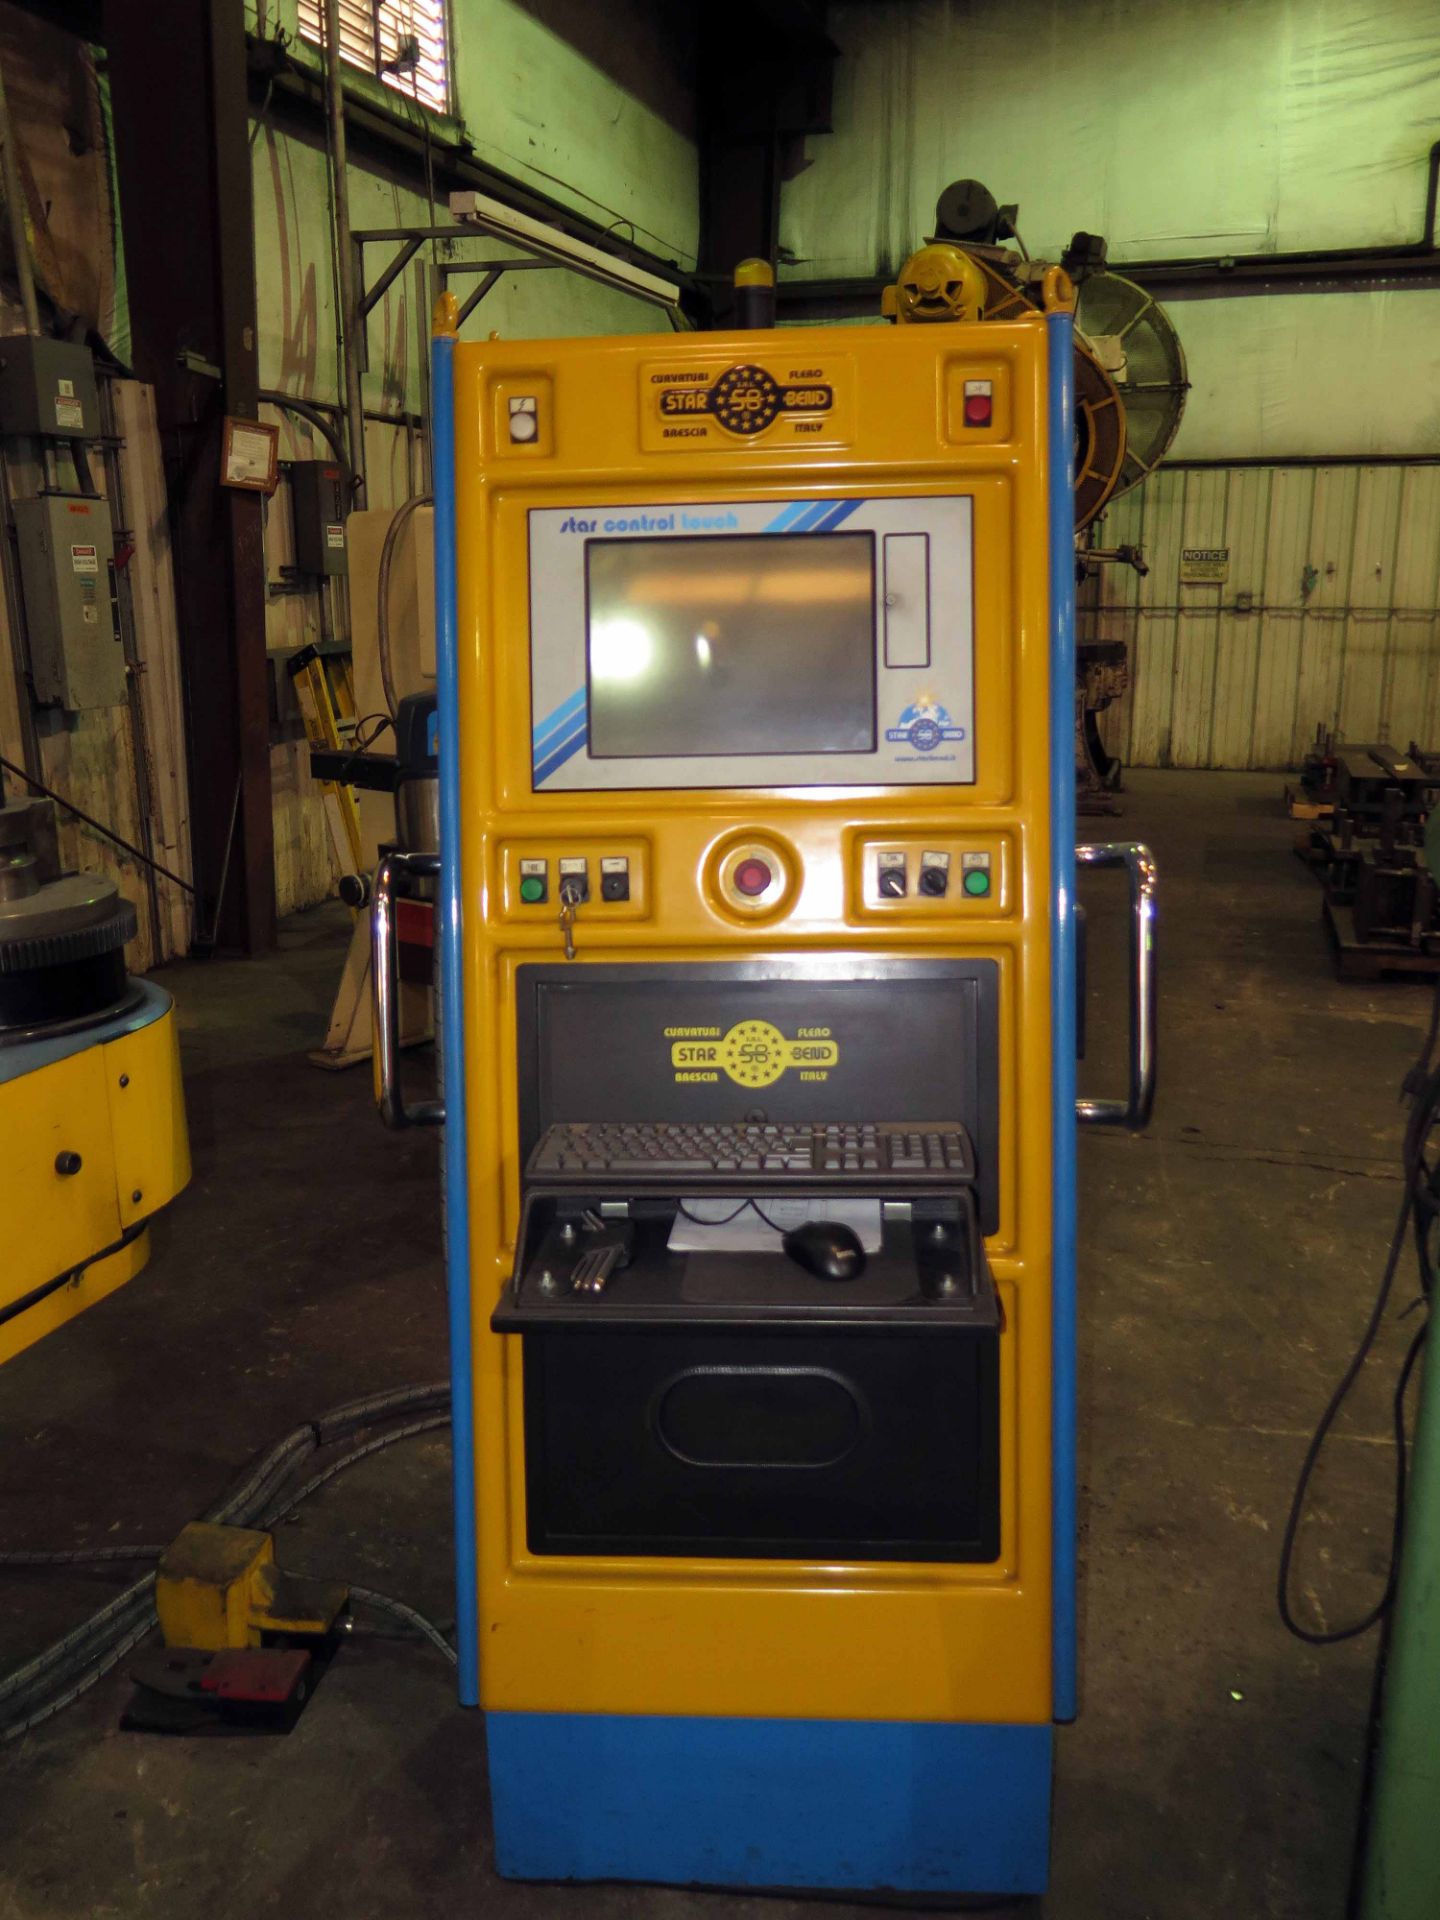 6-AXIS CNC TUBE BENDER, STARBEND MDL. STAR800CN6-GEN-L, new 2008, Starbend CNC control, - Image 5 of 6